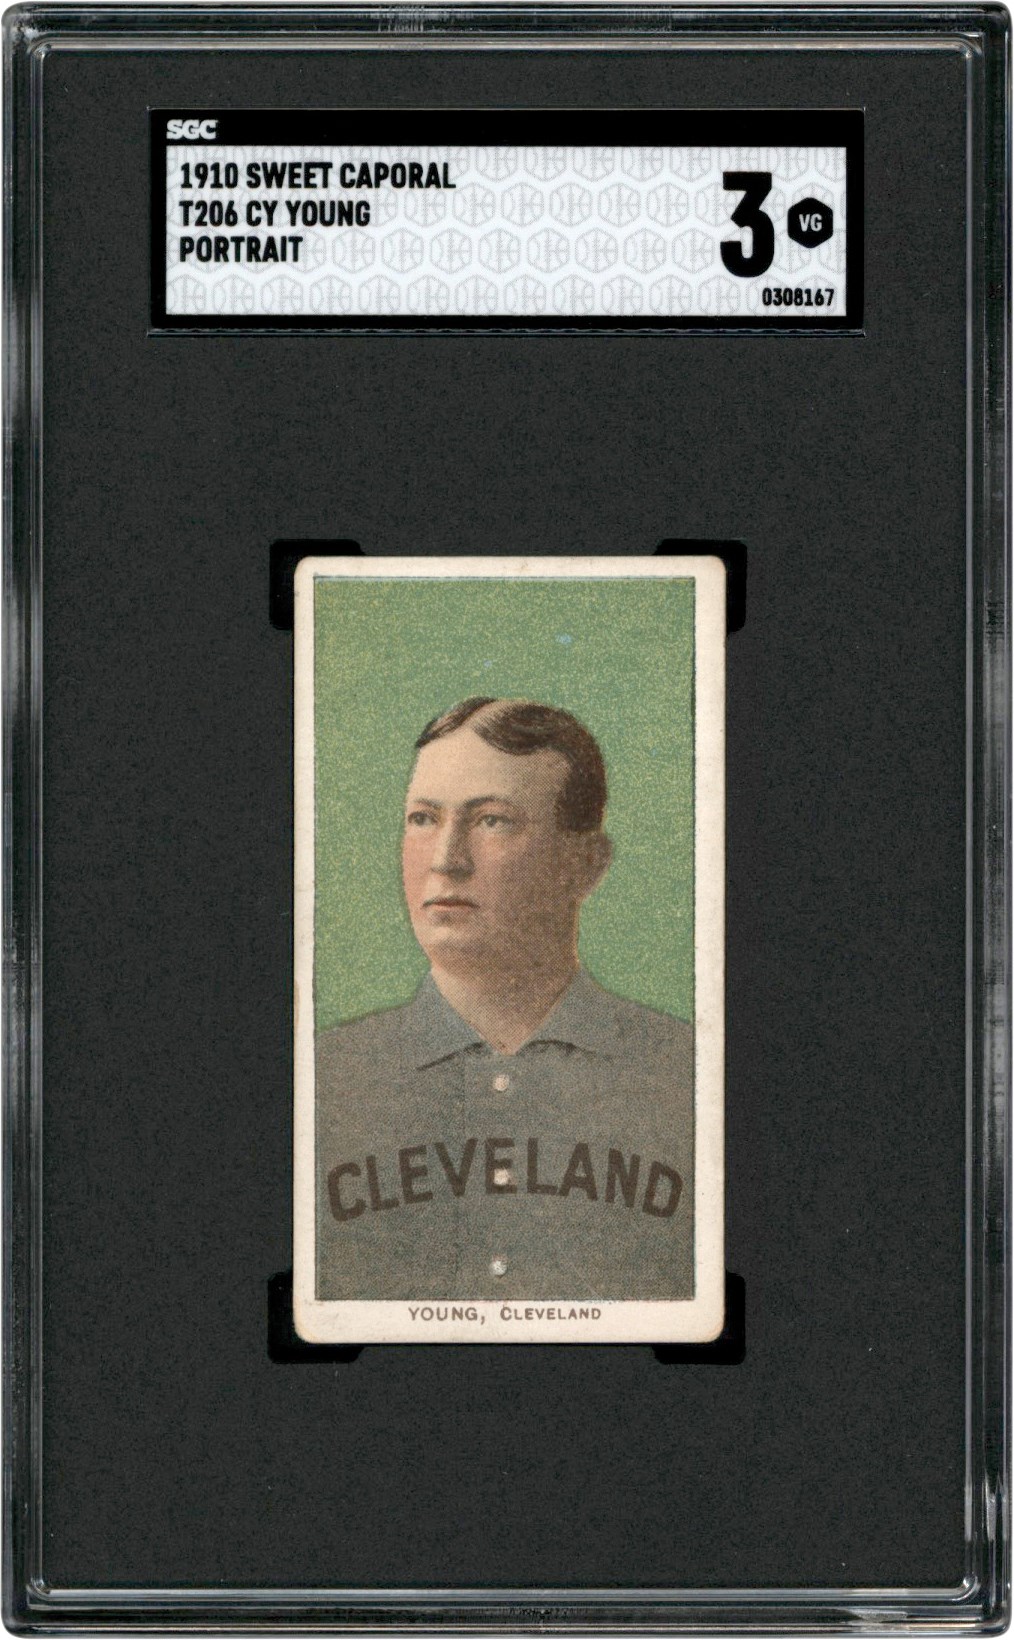 - 909-1911 T206 Cy Young Sweet Caporal (Portrait) SGC VG 3